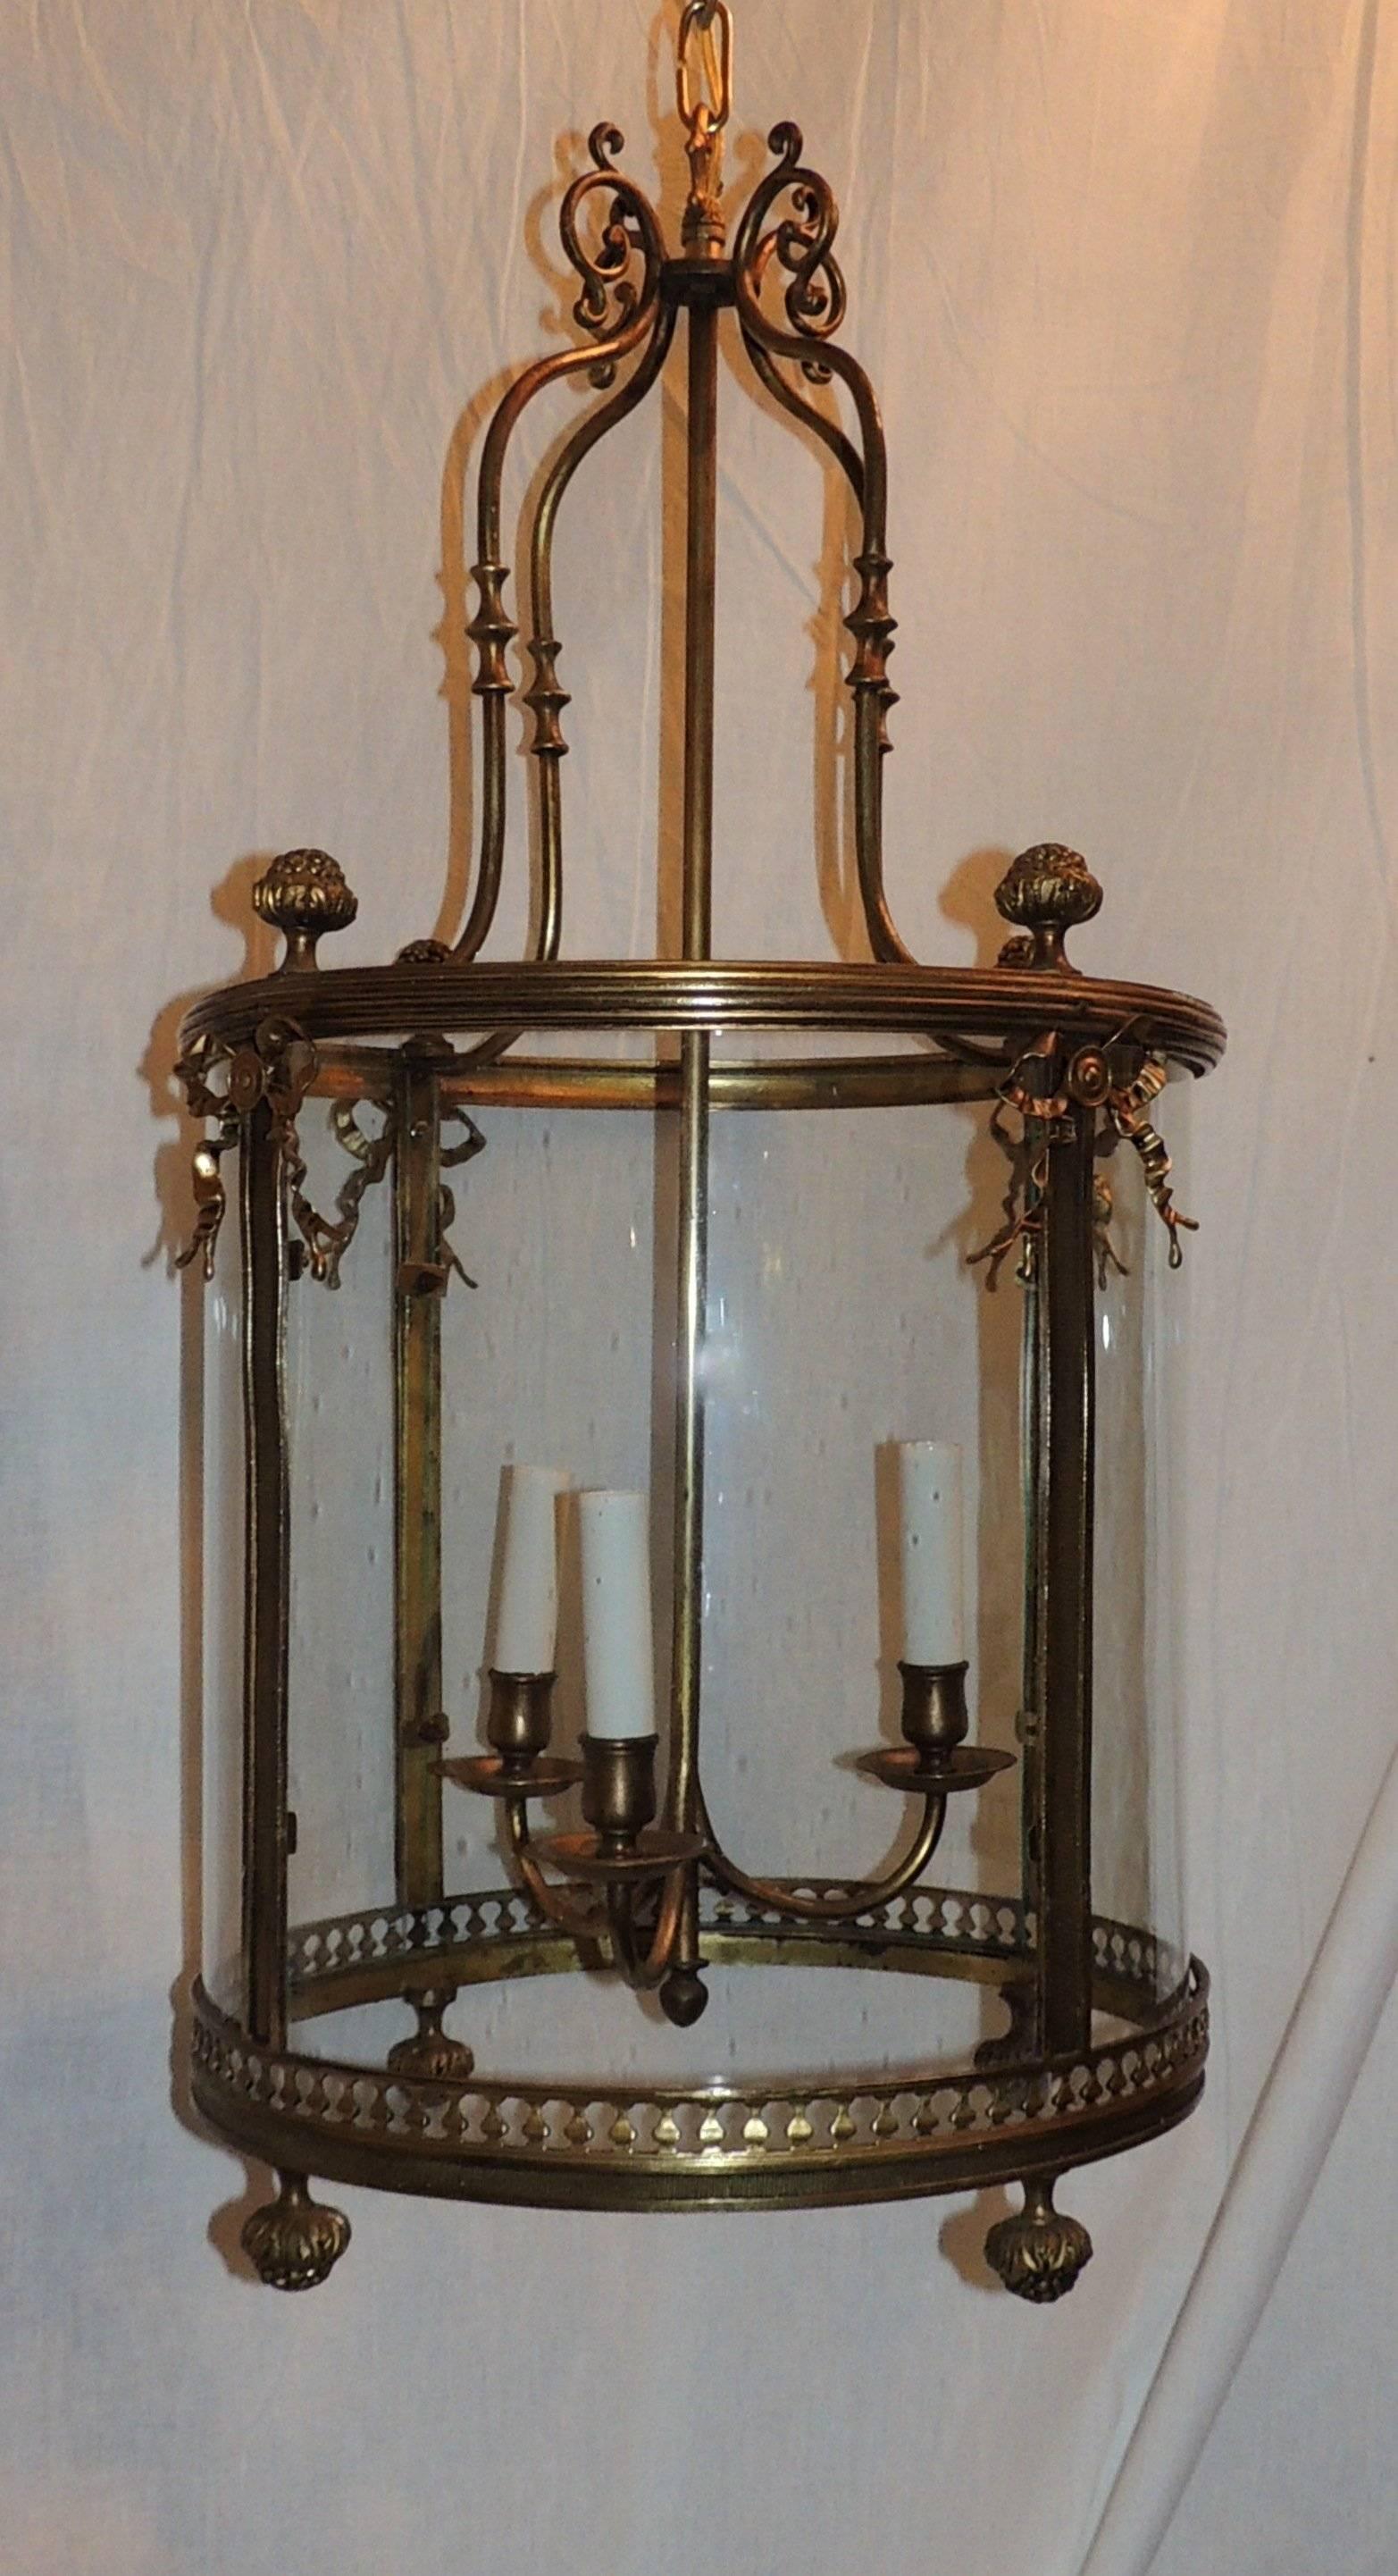 A Beautiful etched bronze with draping bow lantern, pendant lantern fixture with cutout design around the bottom, fluted and filigree edges the top edge and ribbon bows highlight the side panels.

Measures: 29